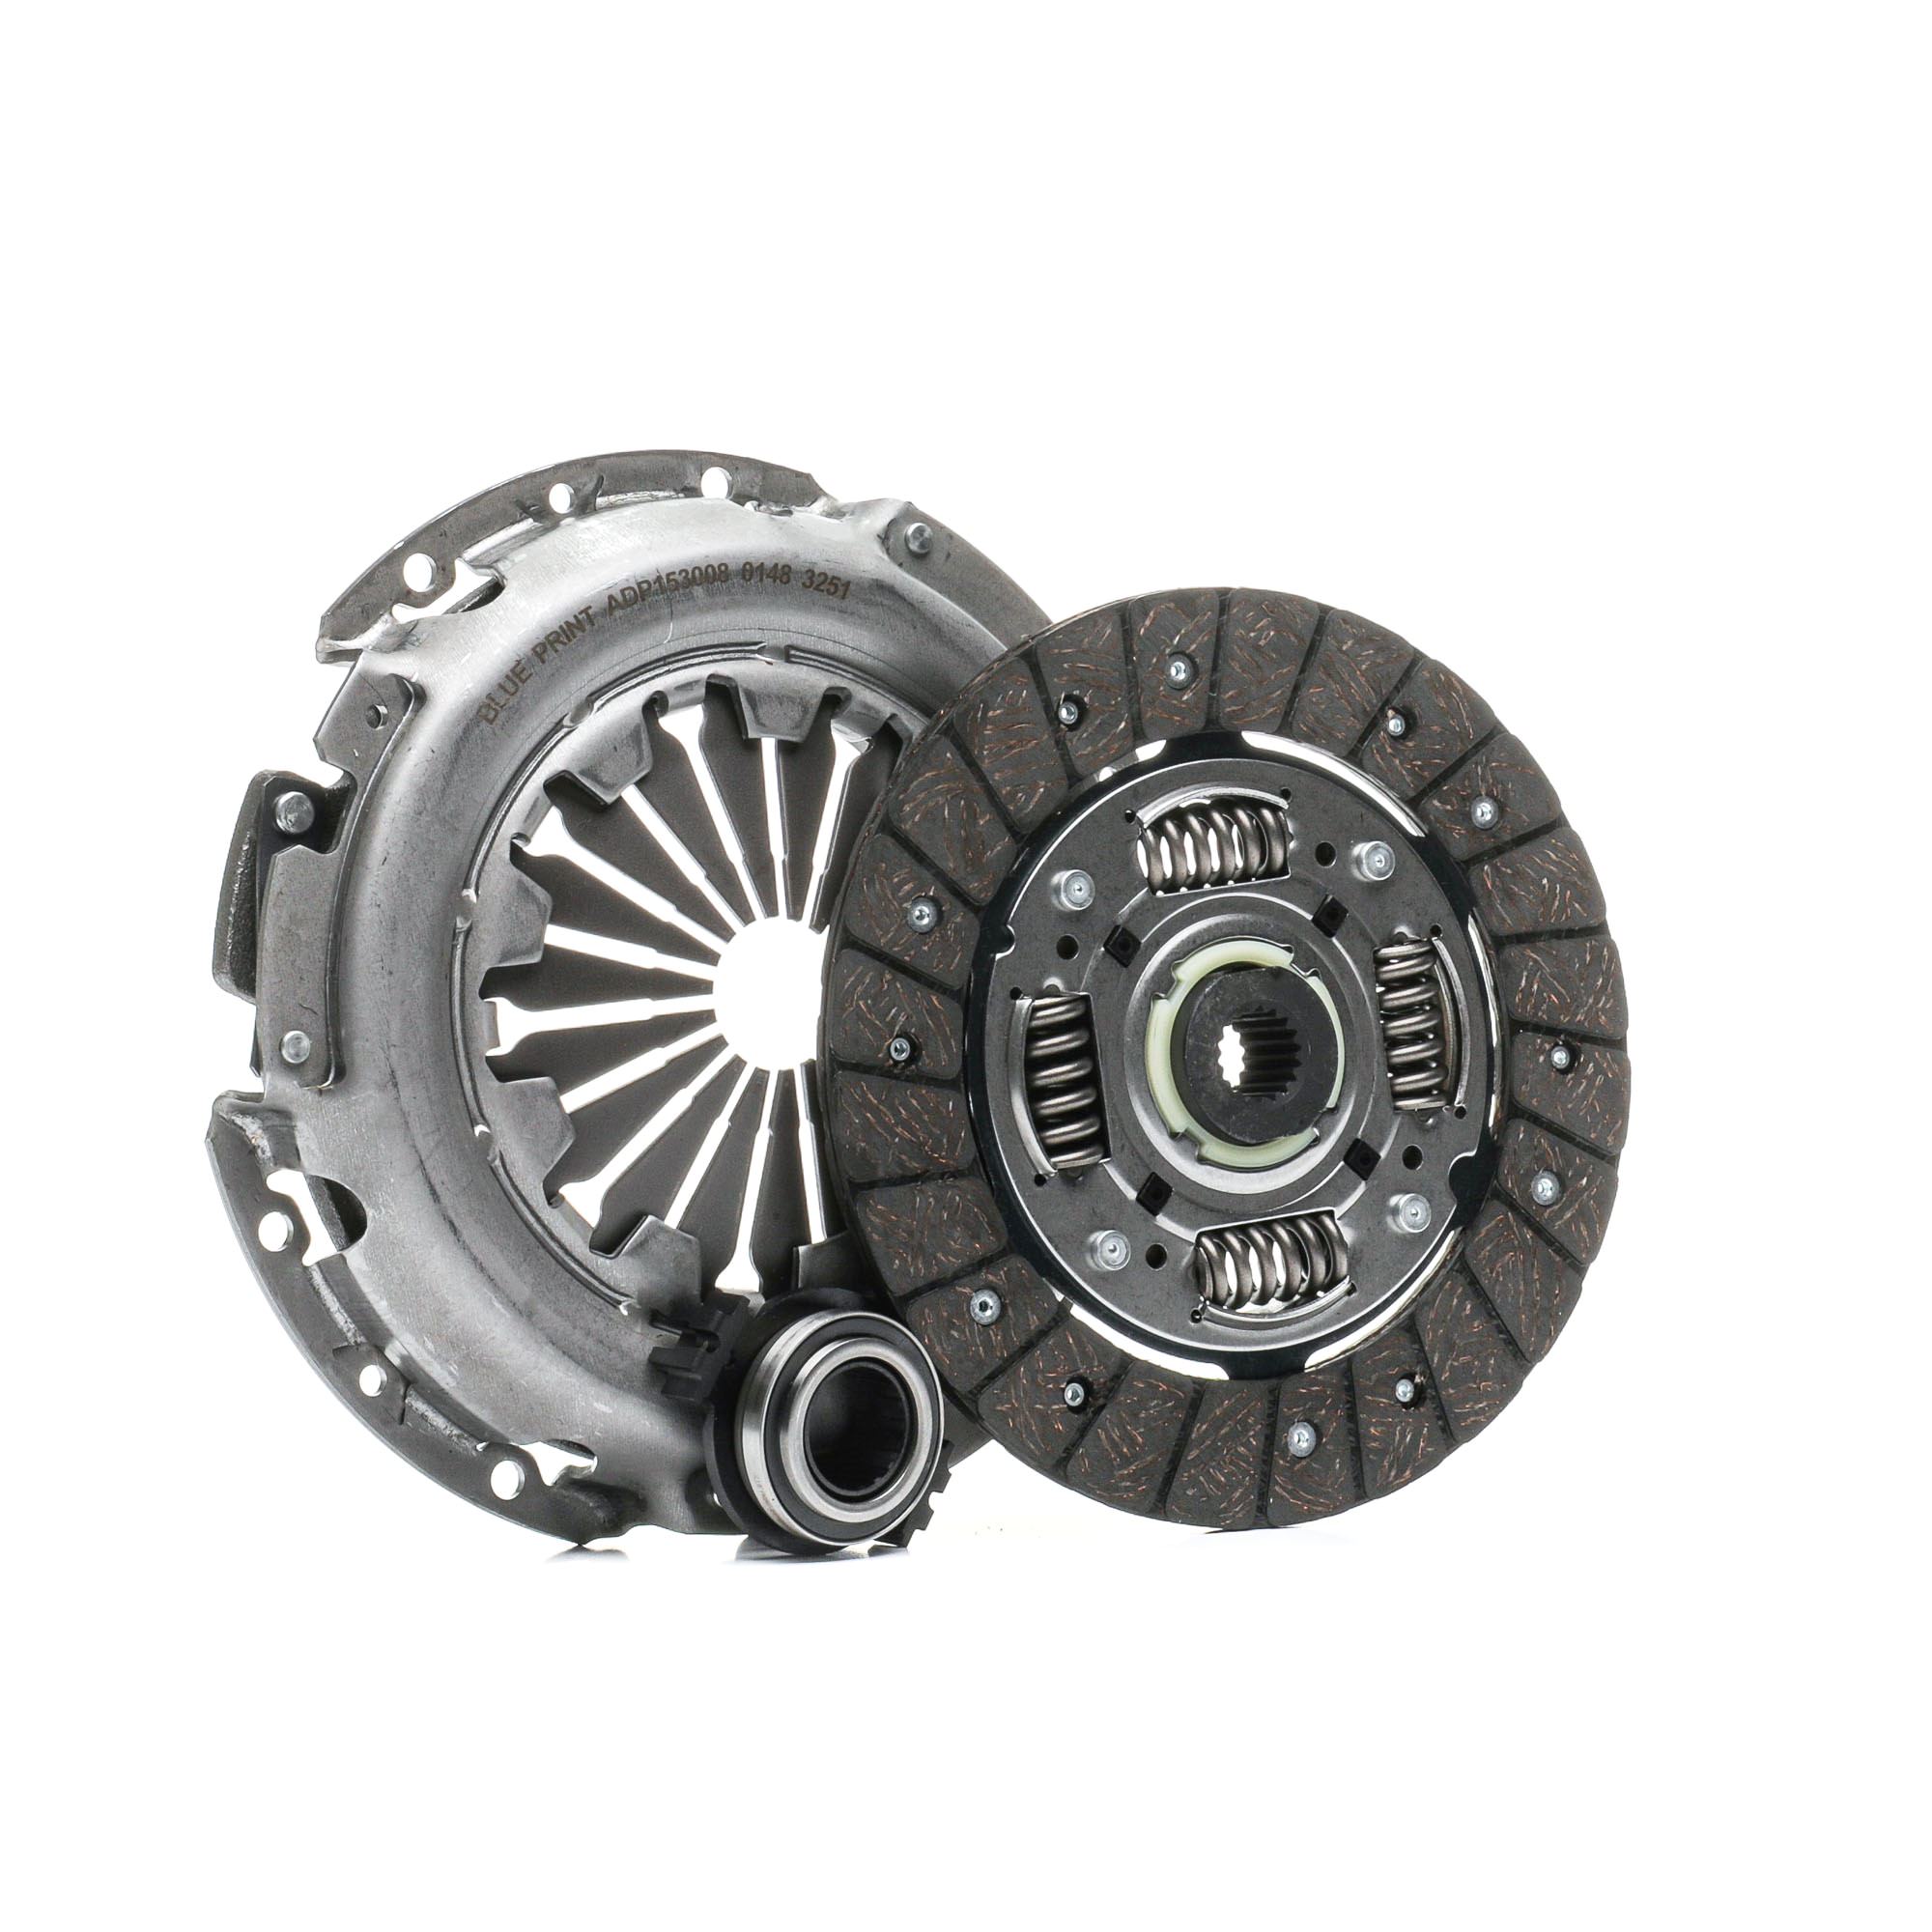 BLUE PRINT ADP153008 Clutch kit three-piece, with synthetic grease, with clutch release bearing, 200mm